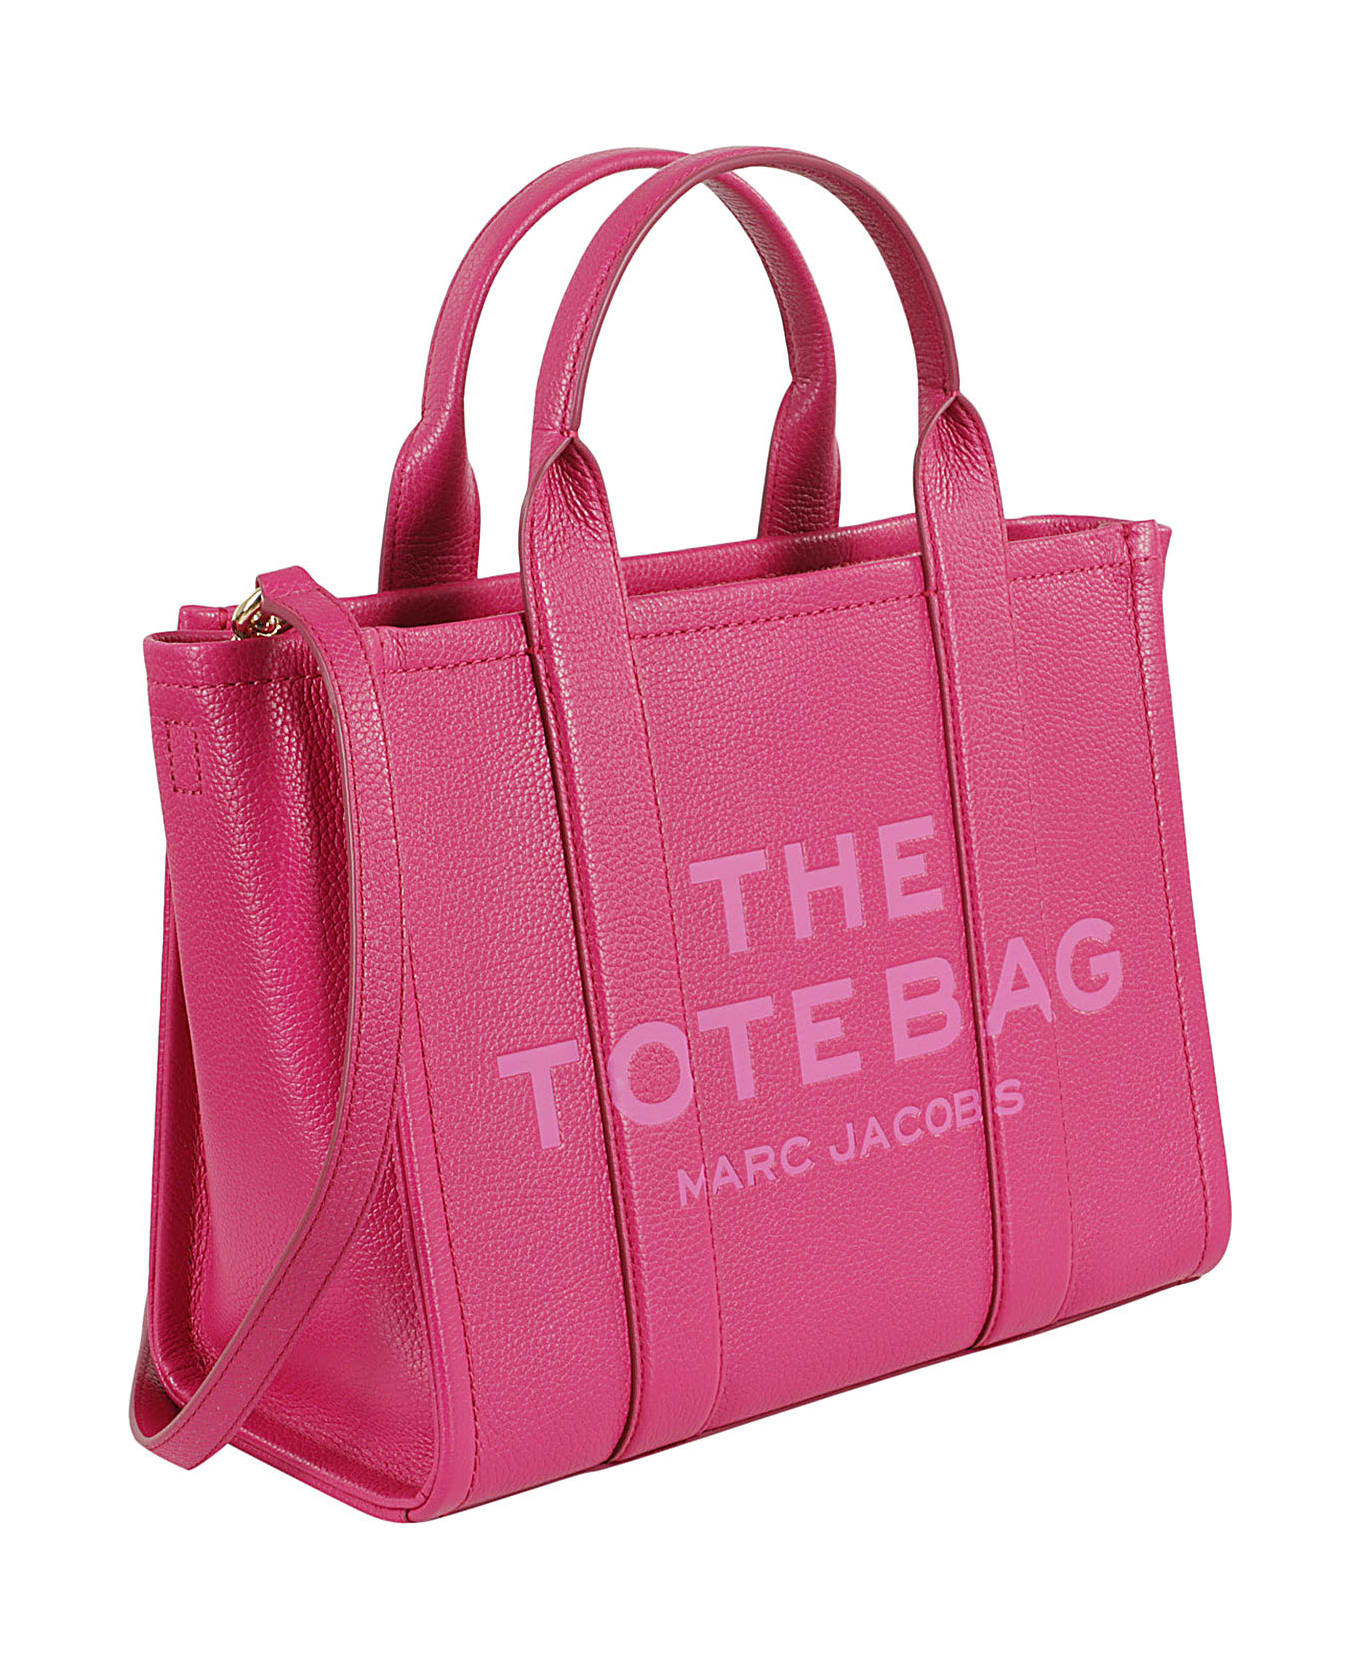 Marc Jacobs The Medium Tote - Lipstick Pink